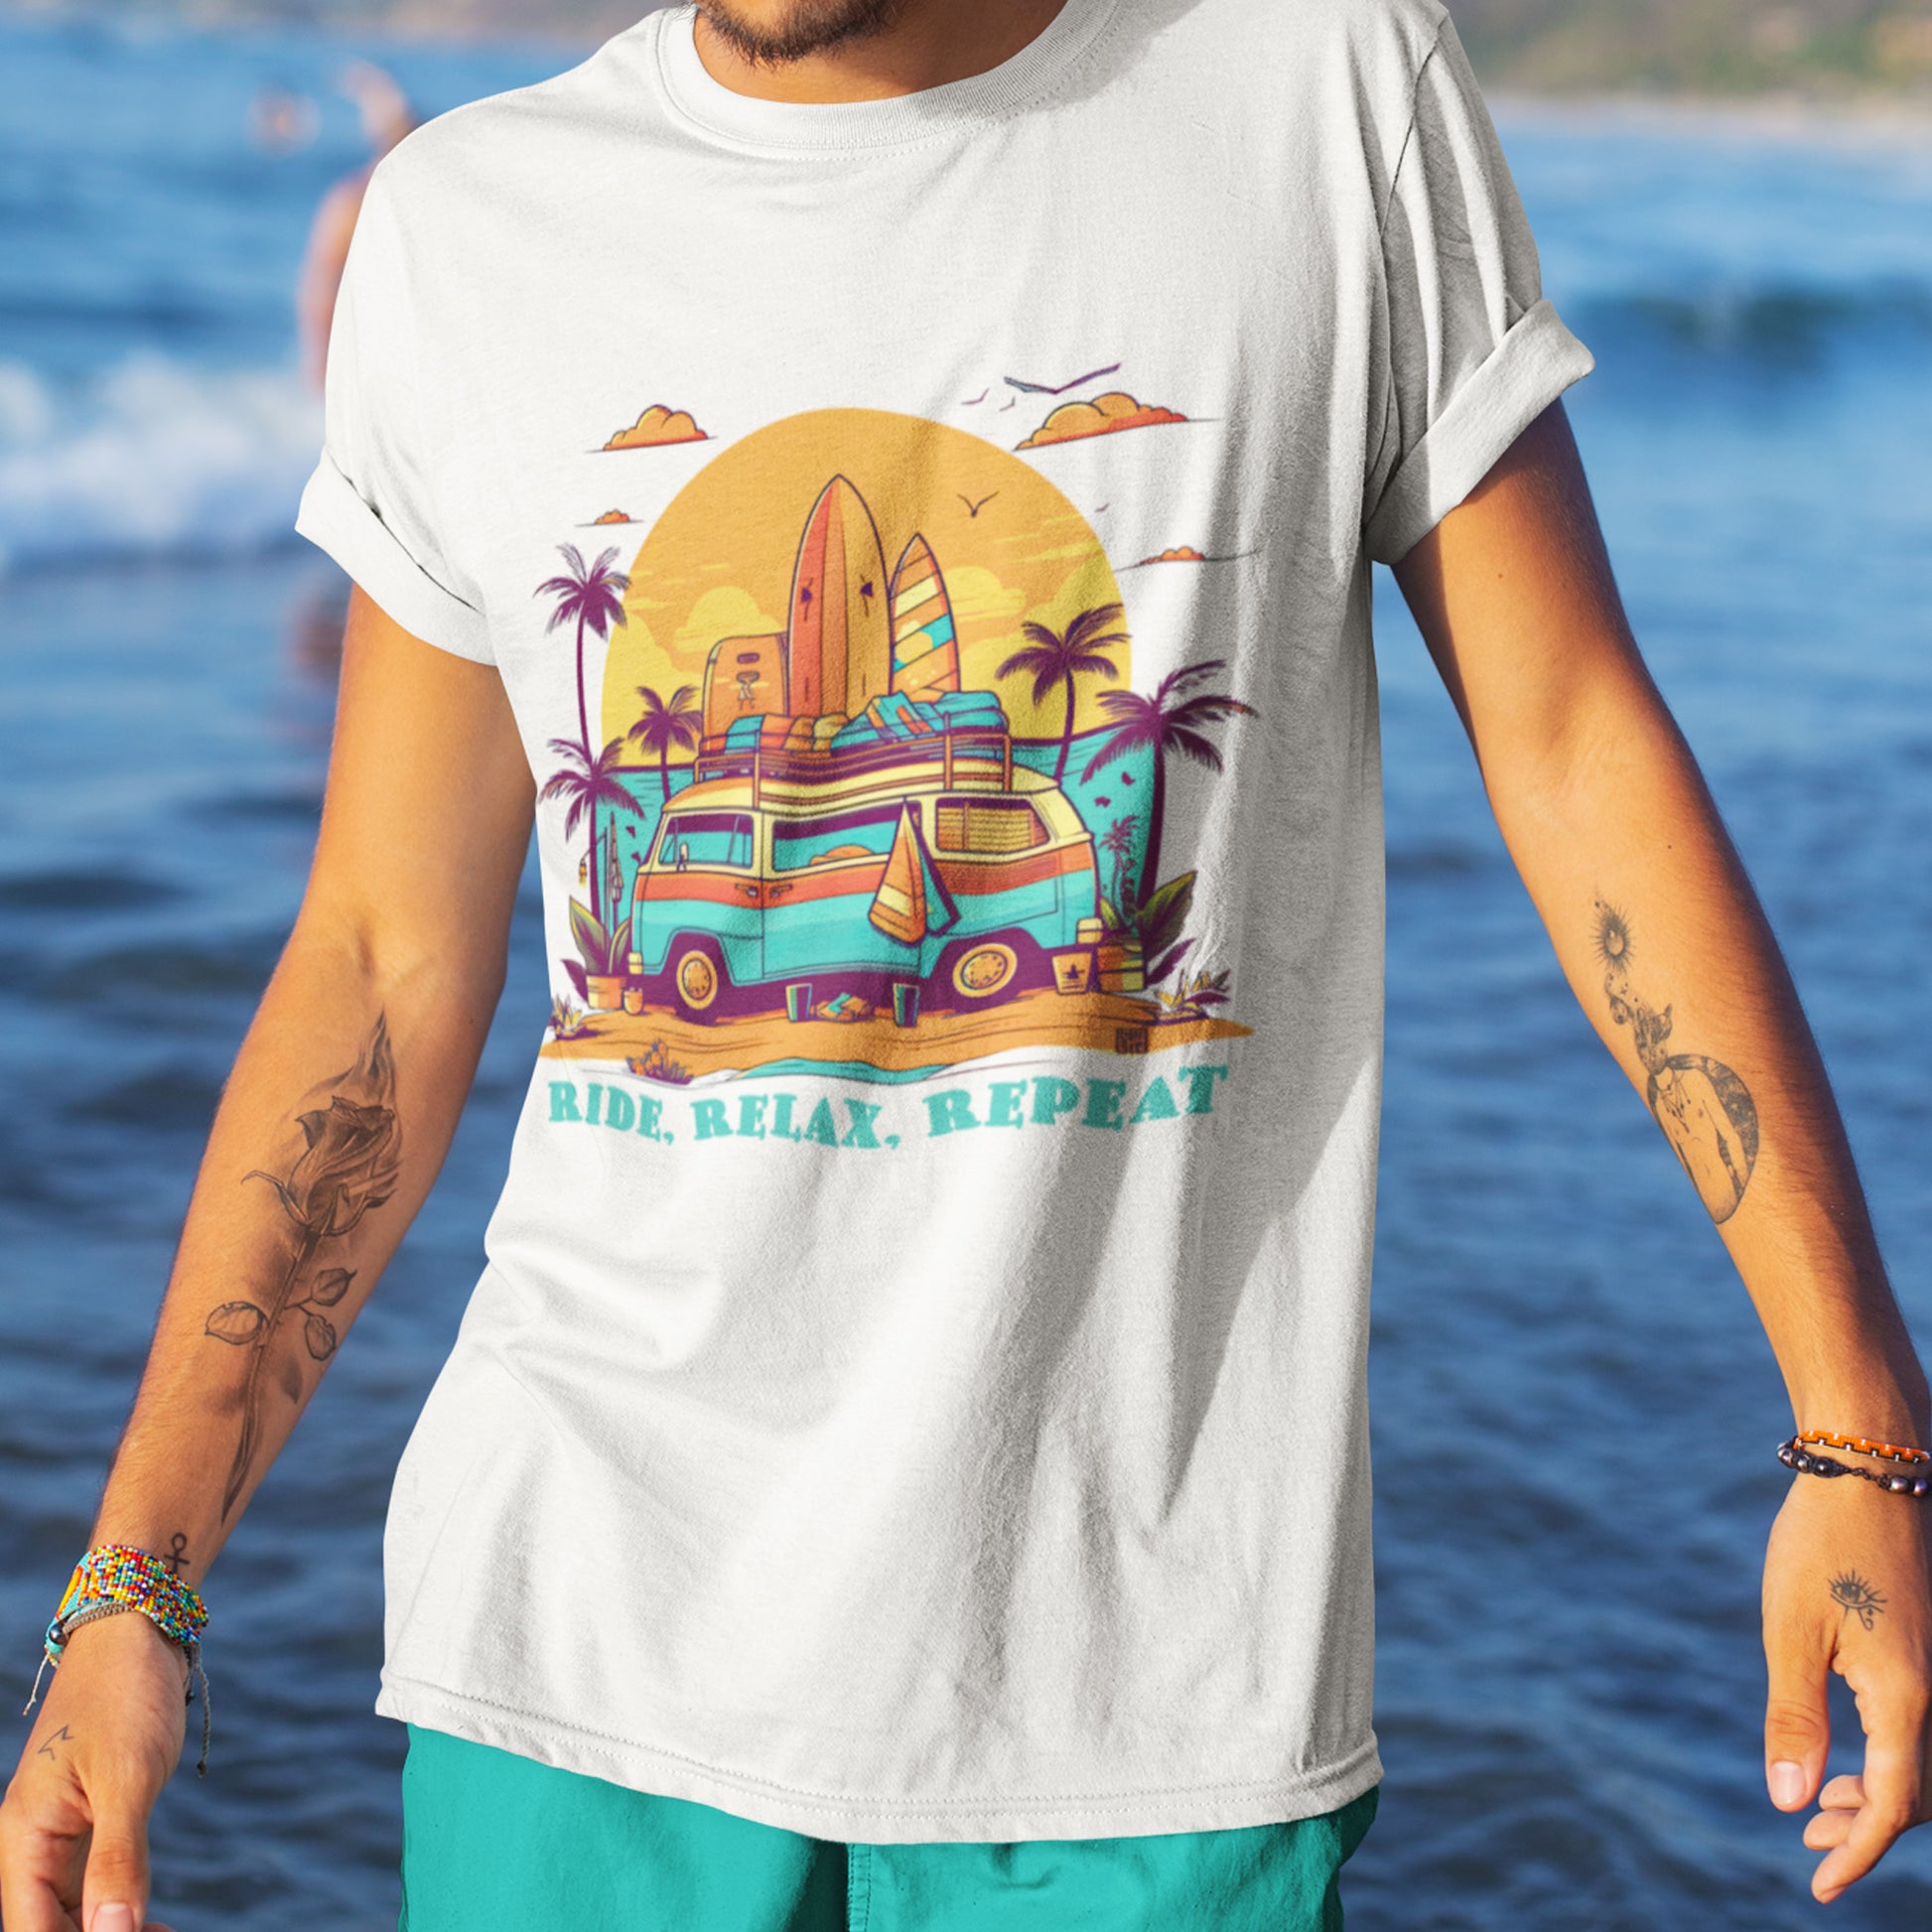 Male model wearing Unisex "Ride, Relax, Repeat" T-Shirt in White on a beach.